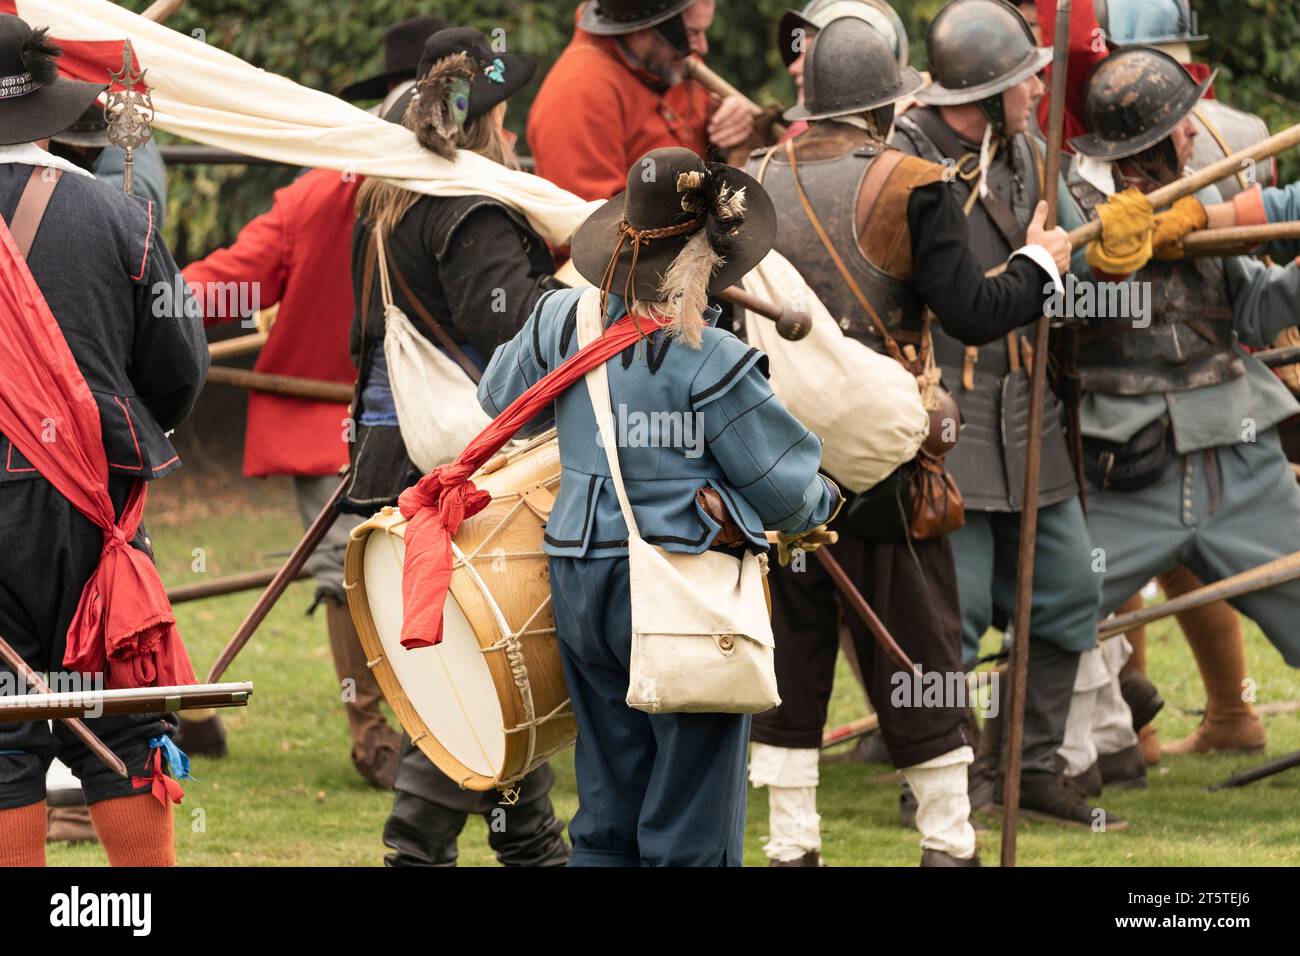 Drummer, ensign and pikemen at a reenactment of the Siege of Basing House, English civil war by the English Civil War Society 16.09.23 Stock Photo